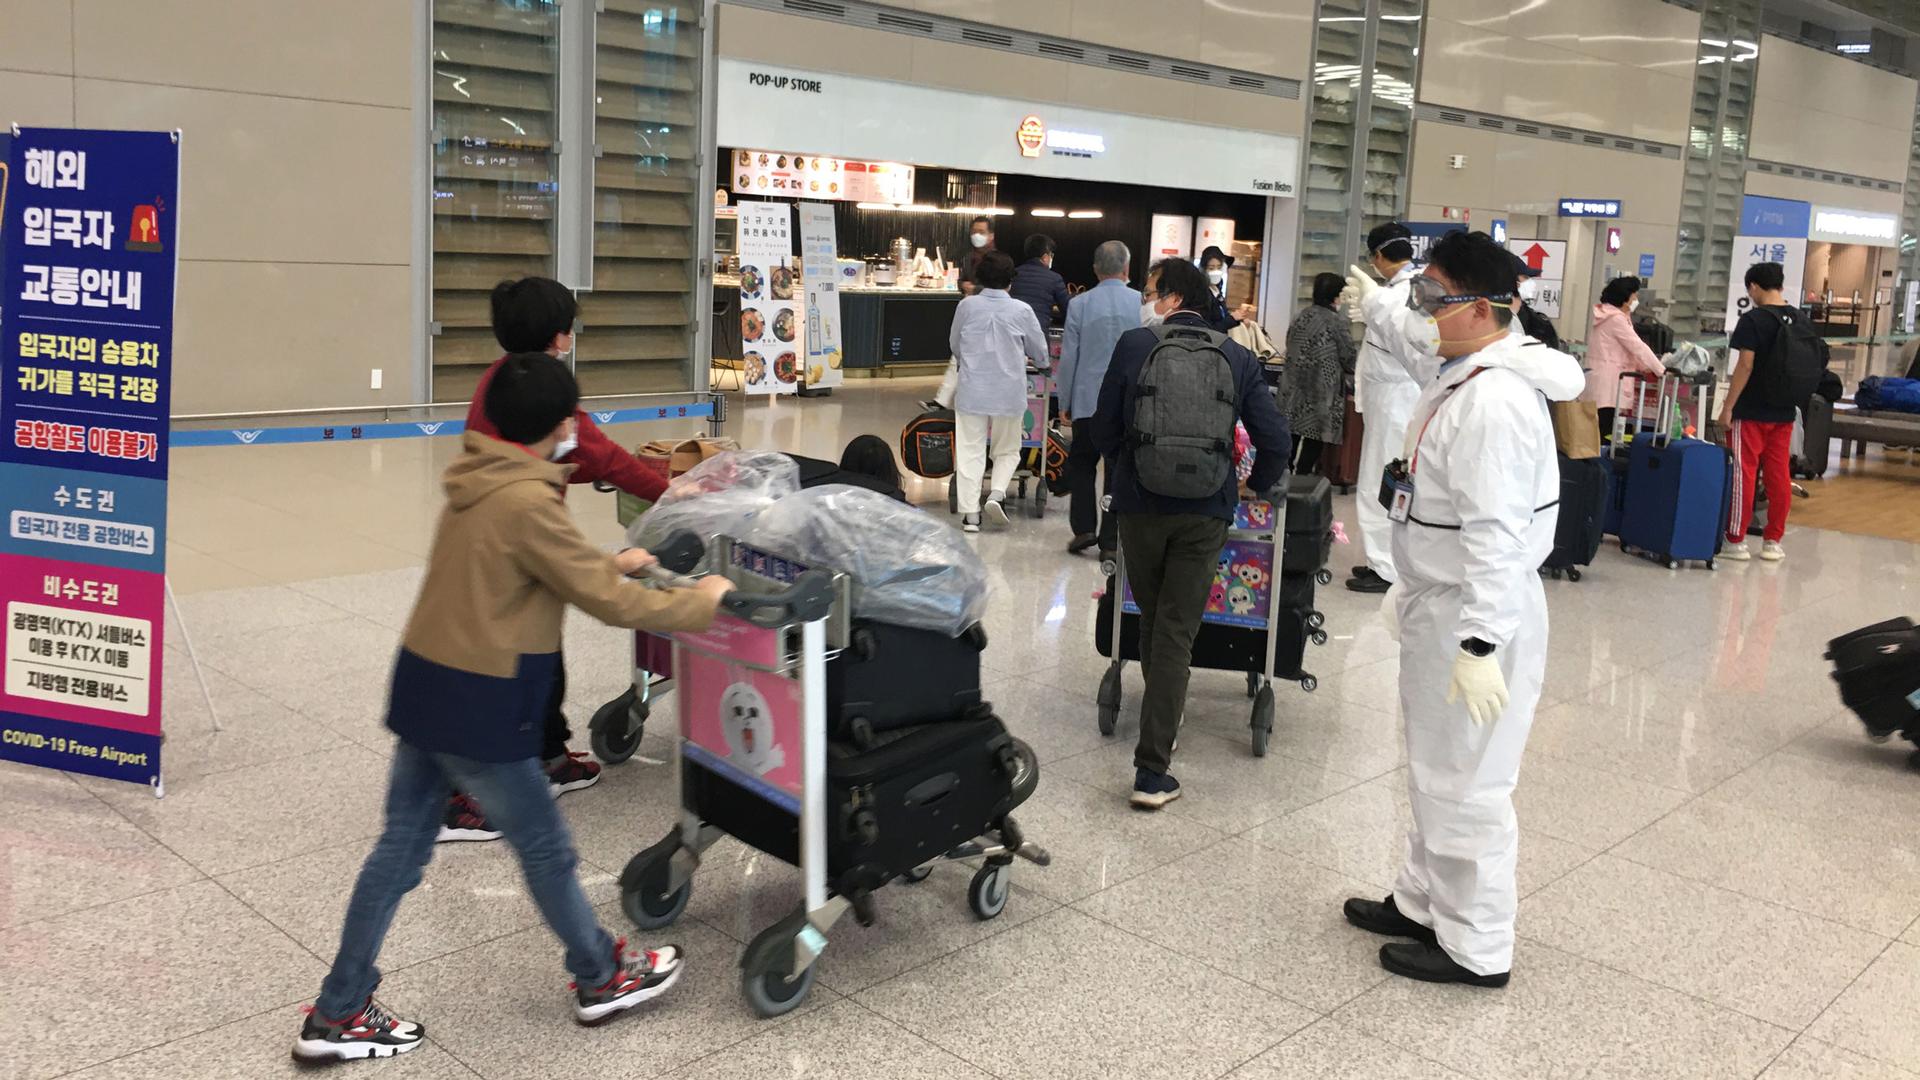 Arrivals at Incheon International Airport are directed by staff in protective gear.